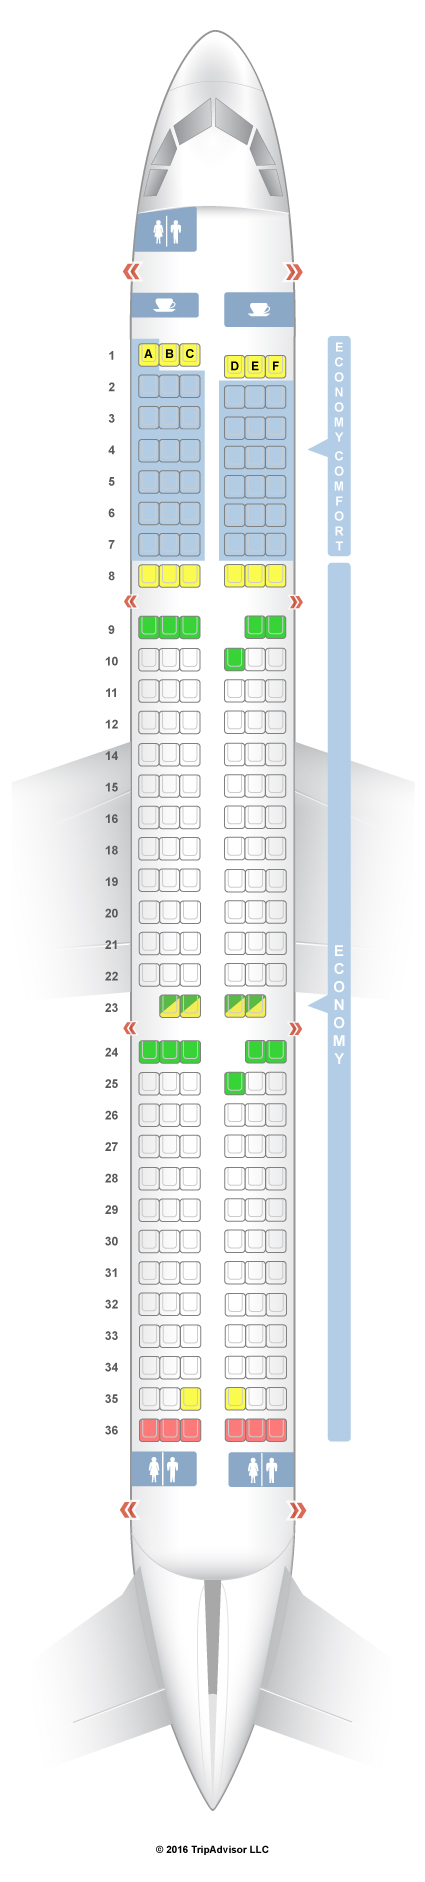 Airbus A321 100 Seating Chart